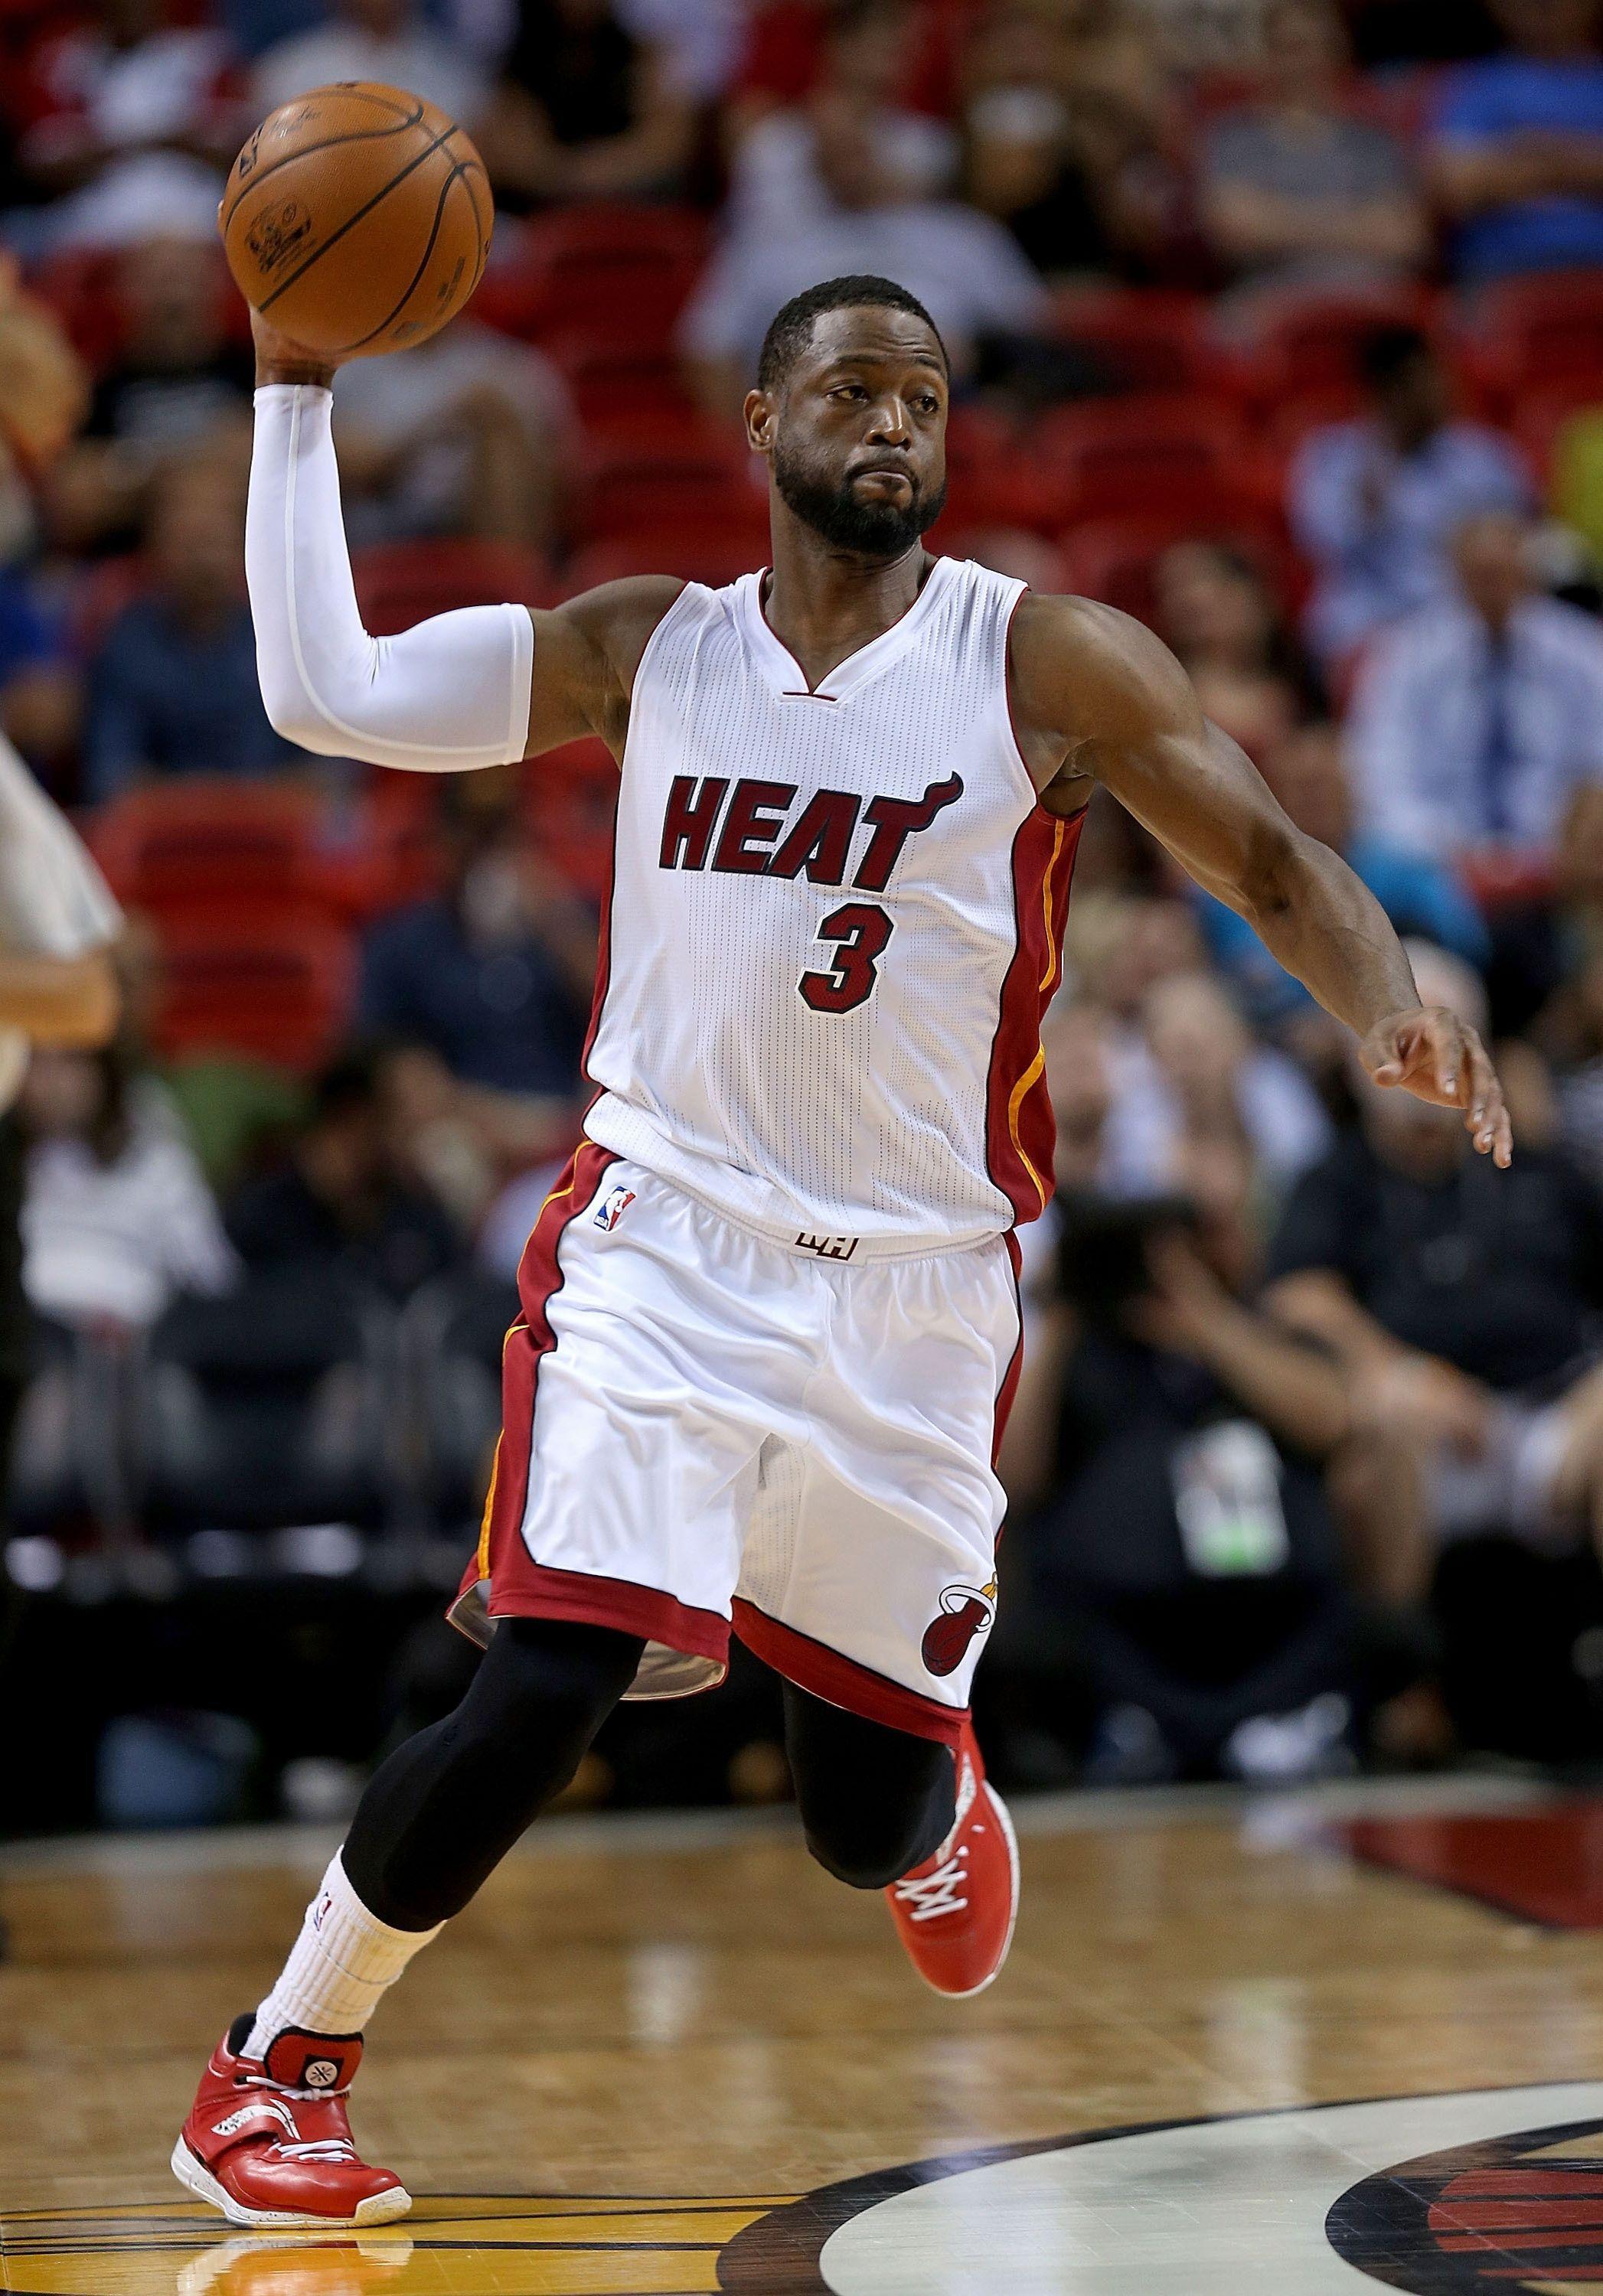 Report: Dwyane Wade could be ready to leave the Miami Heat